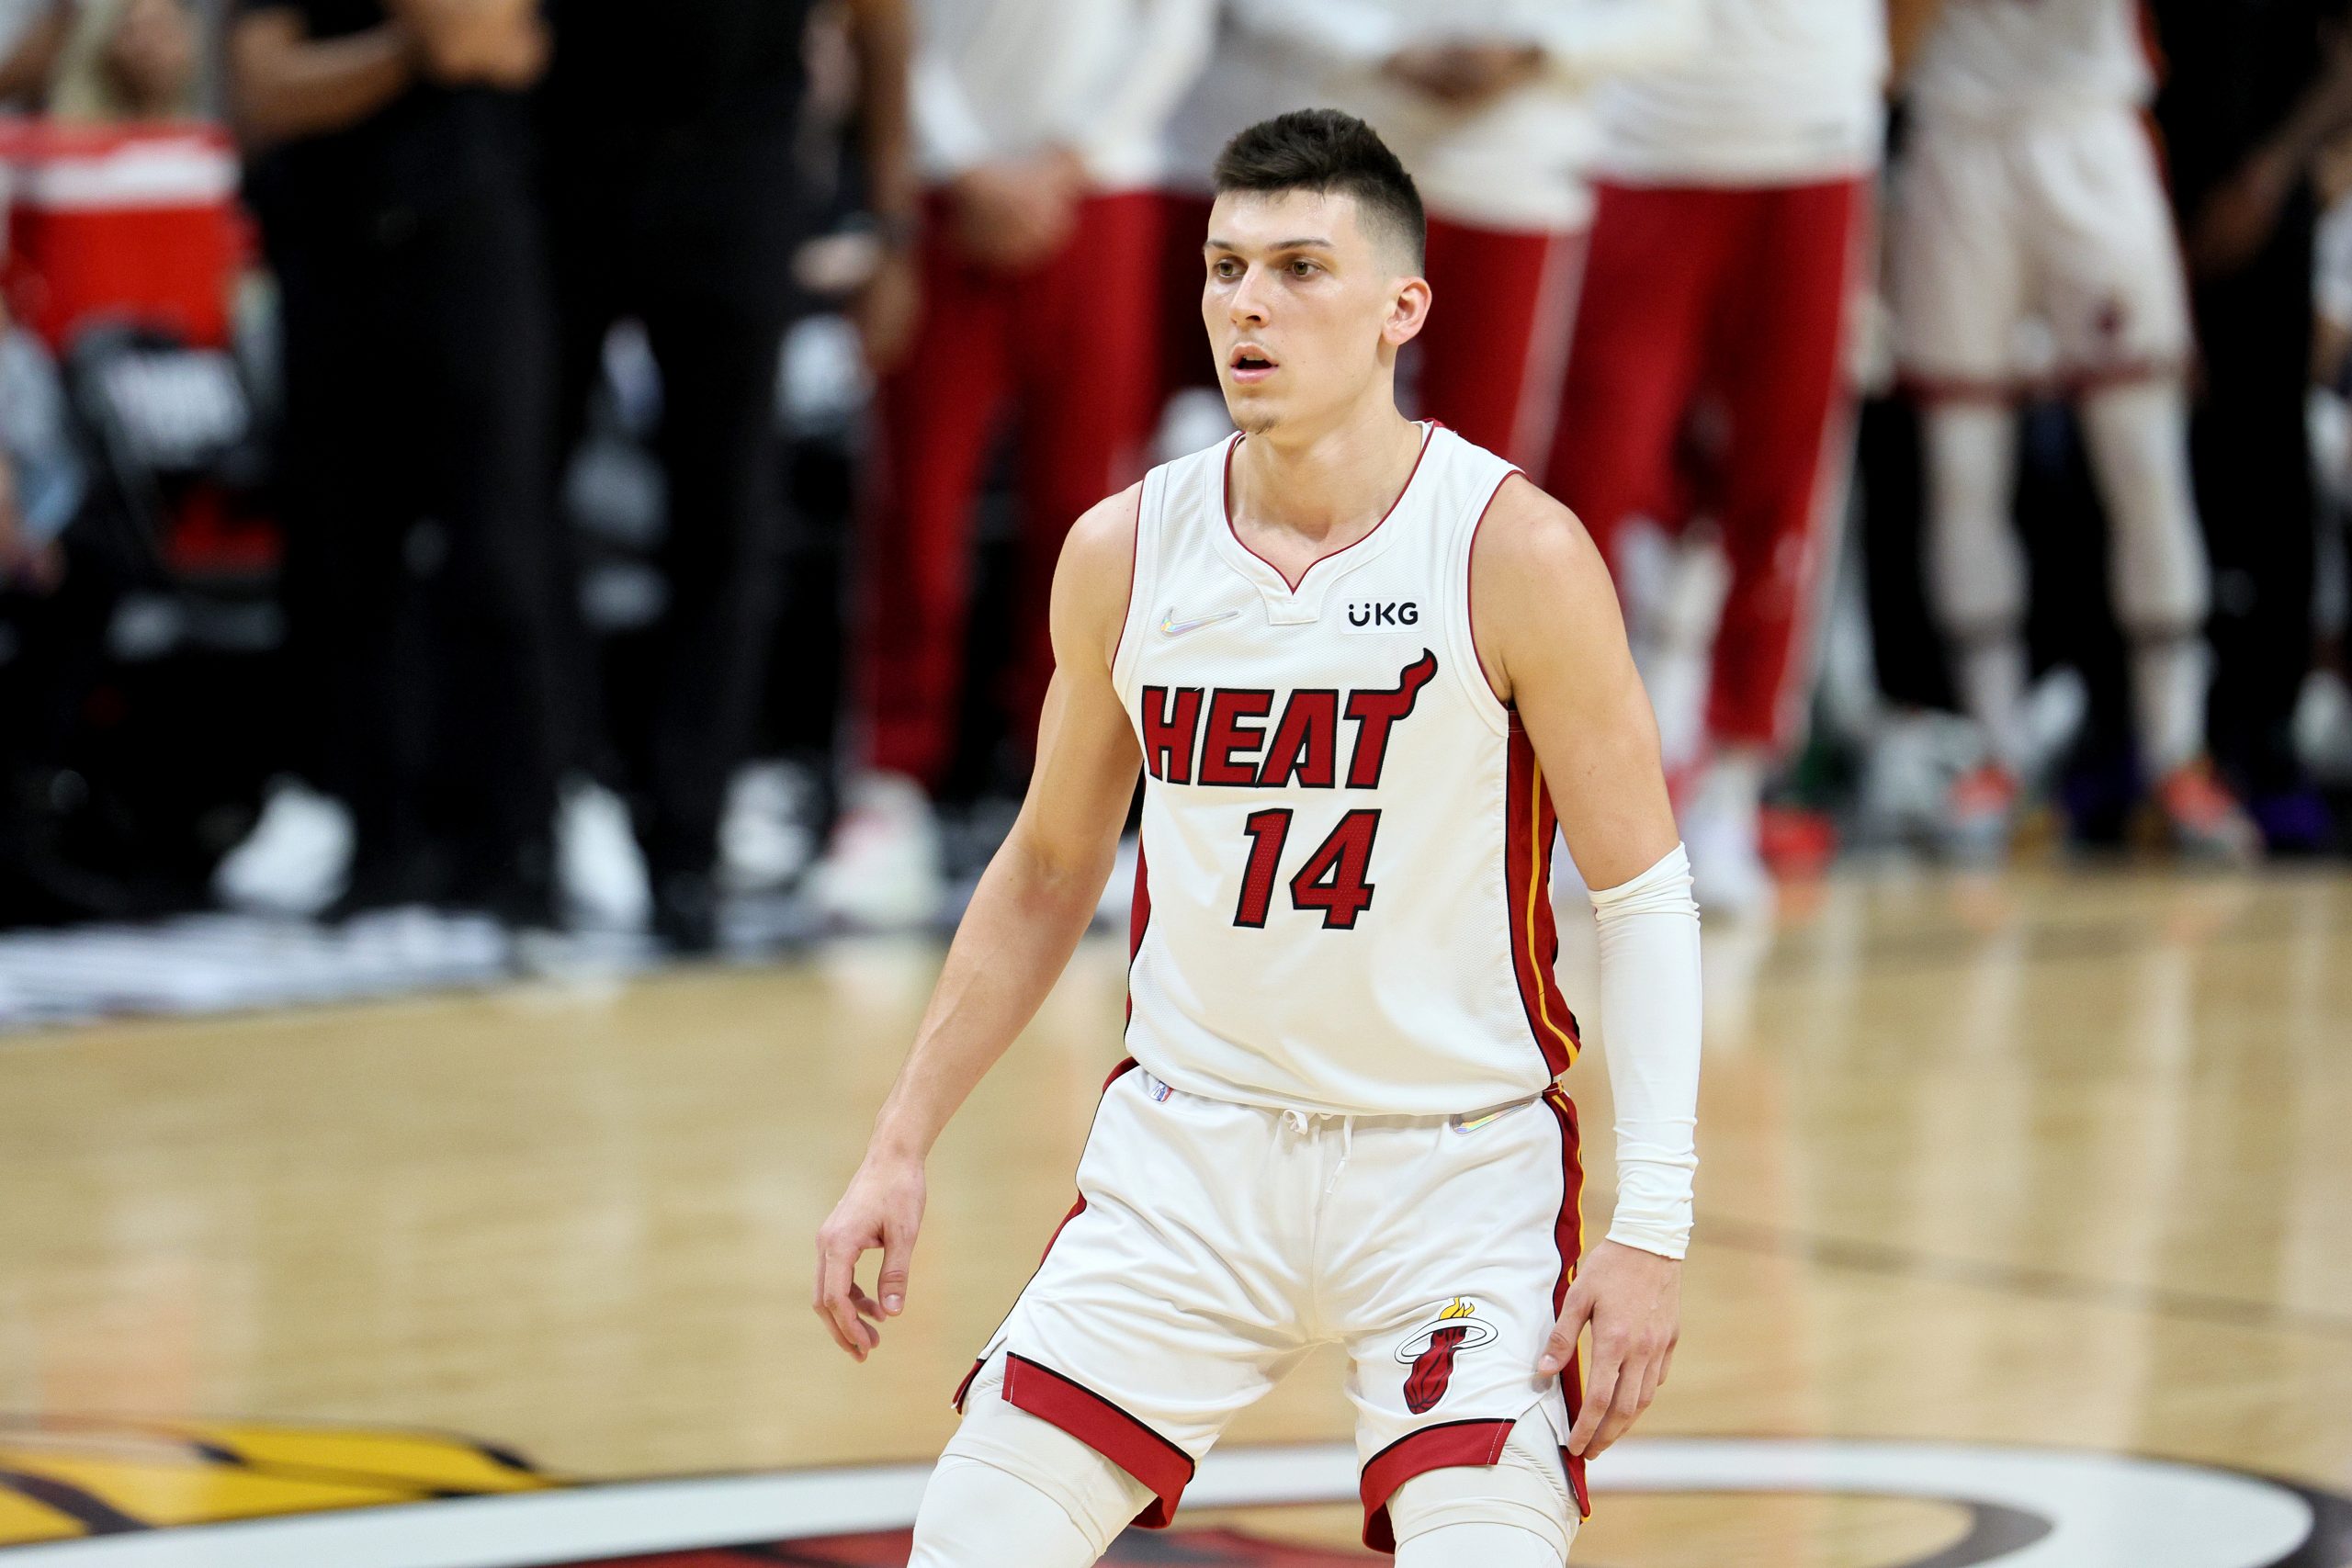 REPORT: Tyler Herro and the Miami Heat Reach an Agreement on a Four-Year, $130 Million Extension